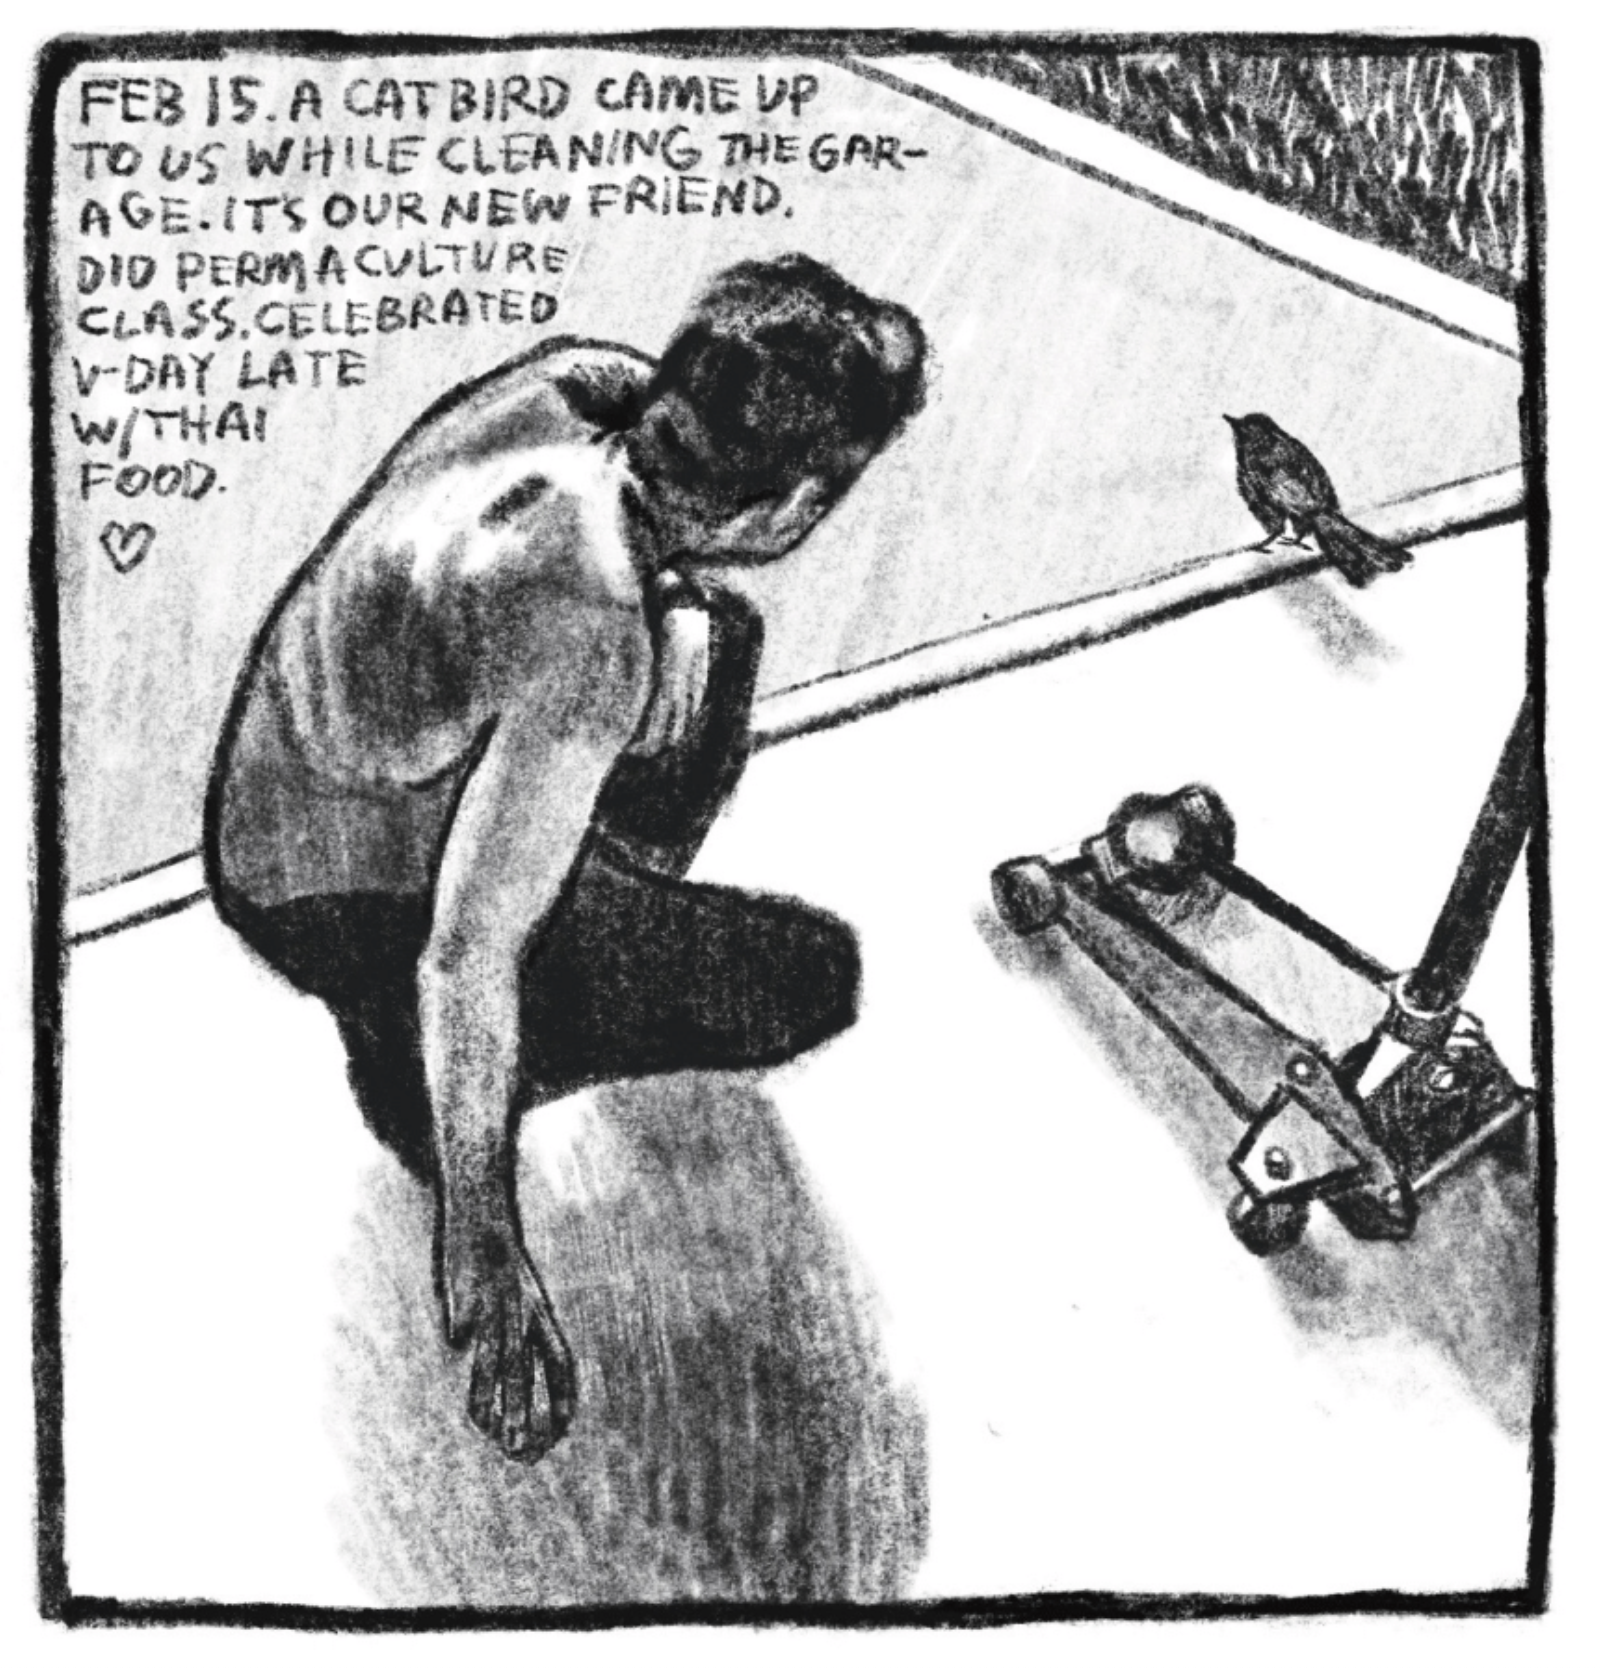 Hold Still Episode 8, Panel 5
"FEB 15. A CAT BIRD CAME UP TO US WHILE CLEANING THE GARAGE. IT'S OUR NEW FRIEND. DID PERMACULTURE CLASS. CELEBRATED V-DAY LATE W/THAI FOOD. <3"
Drawing of a man, whose back is turned to the viewer, crouching down next to a scooter and observing a cat bird.